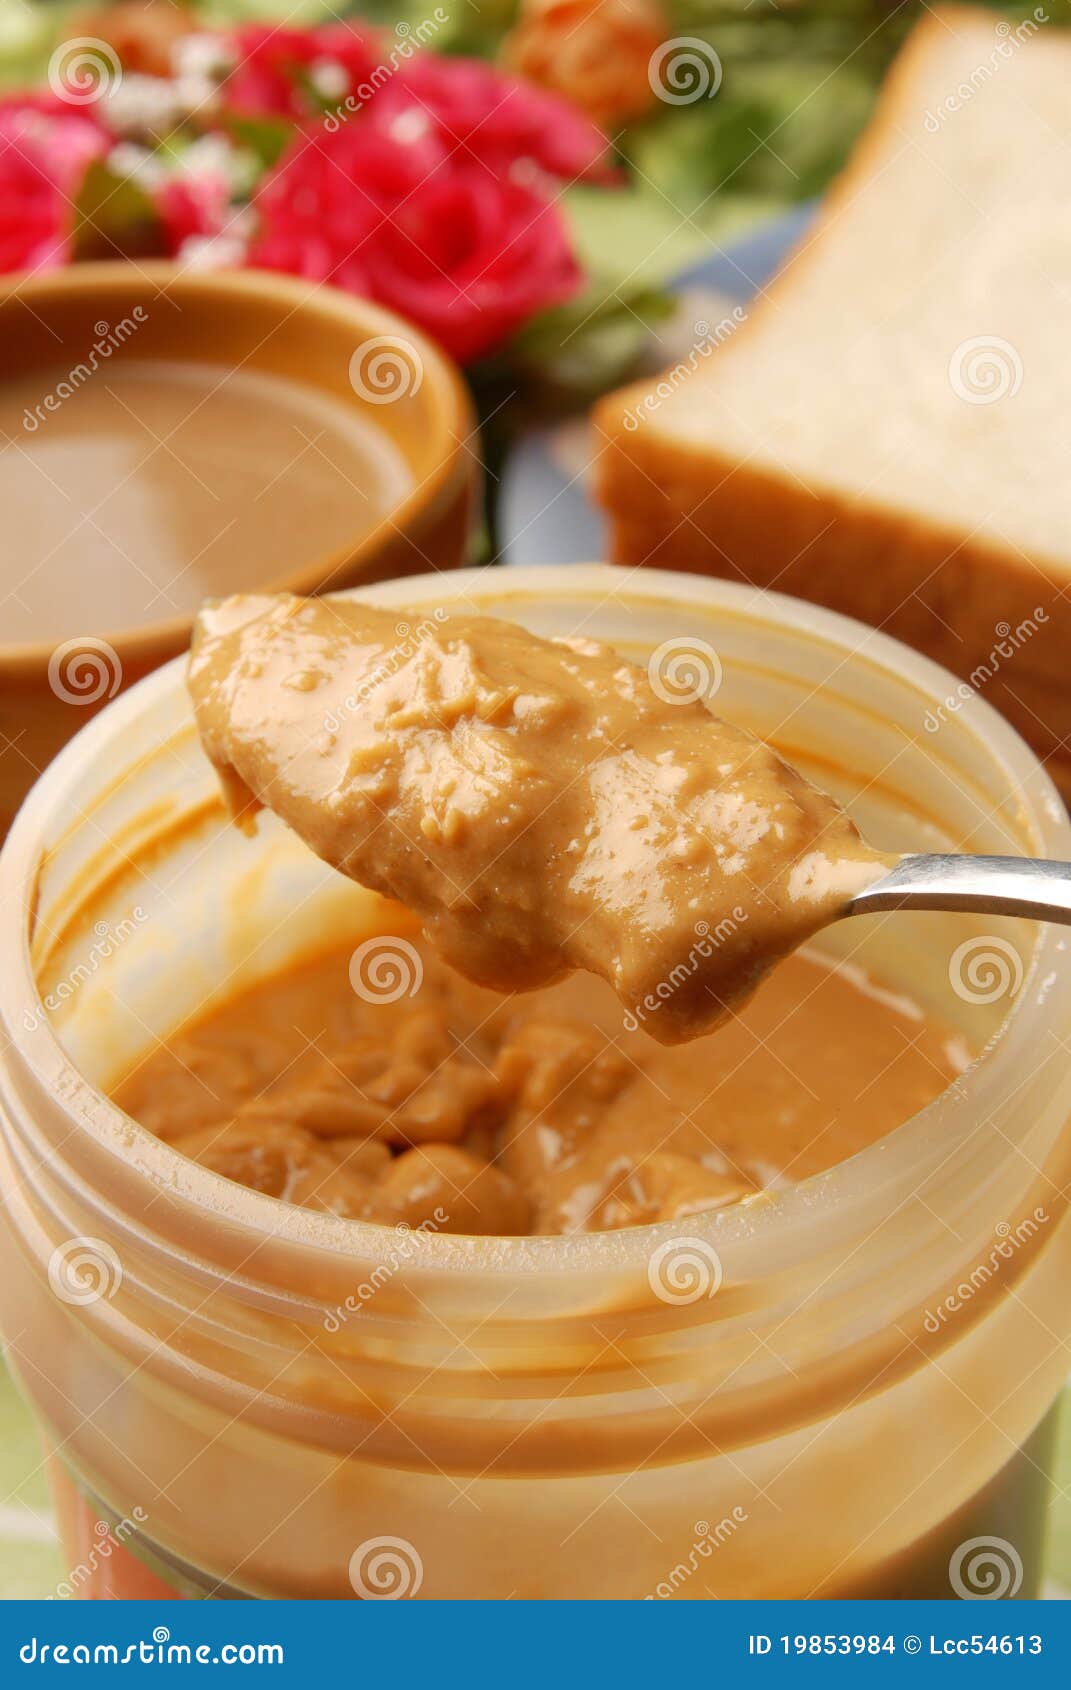 Peanut butter spread on a knife Stock Photo by ©magone 70606539